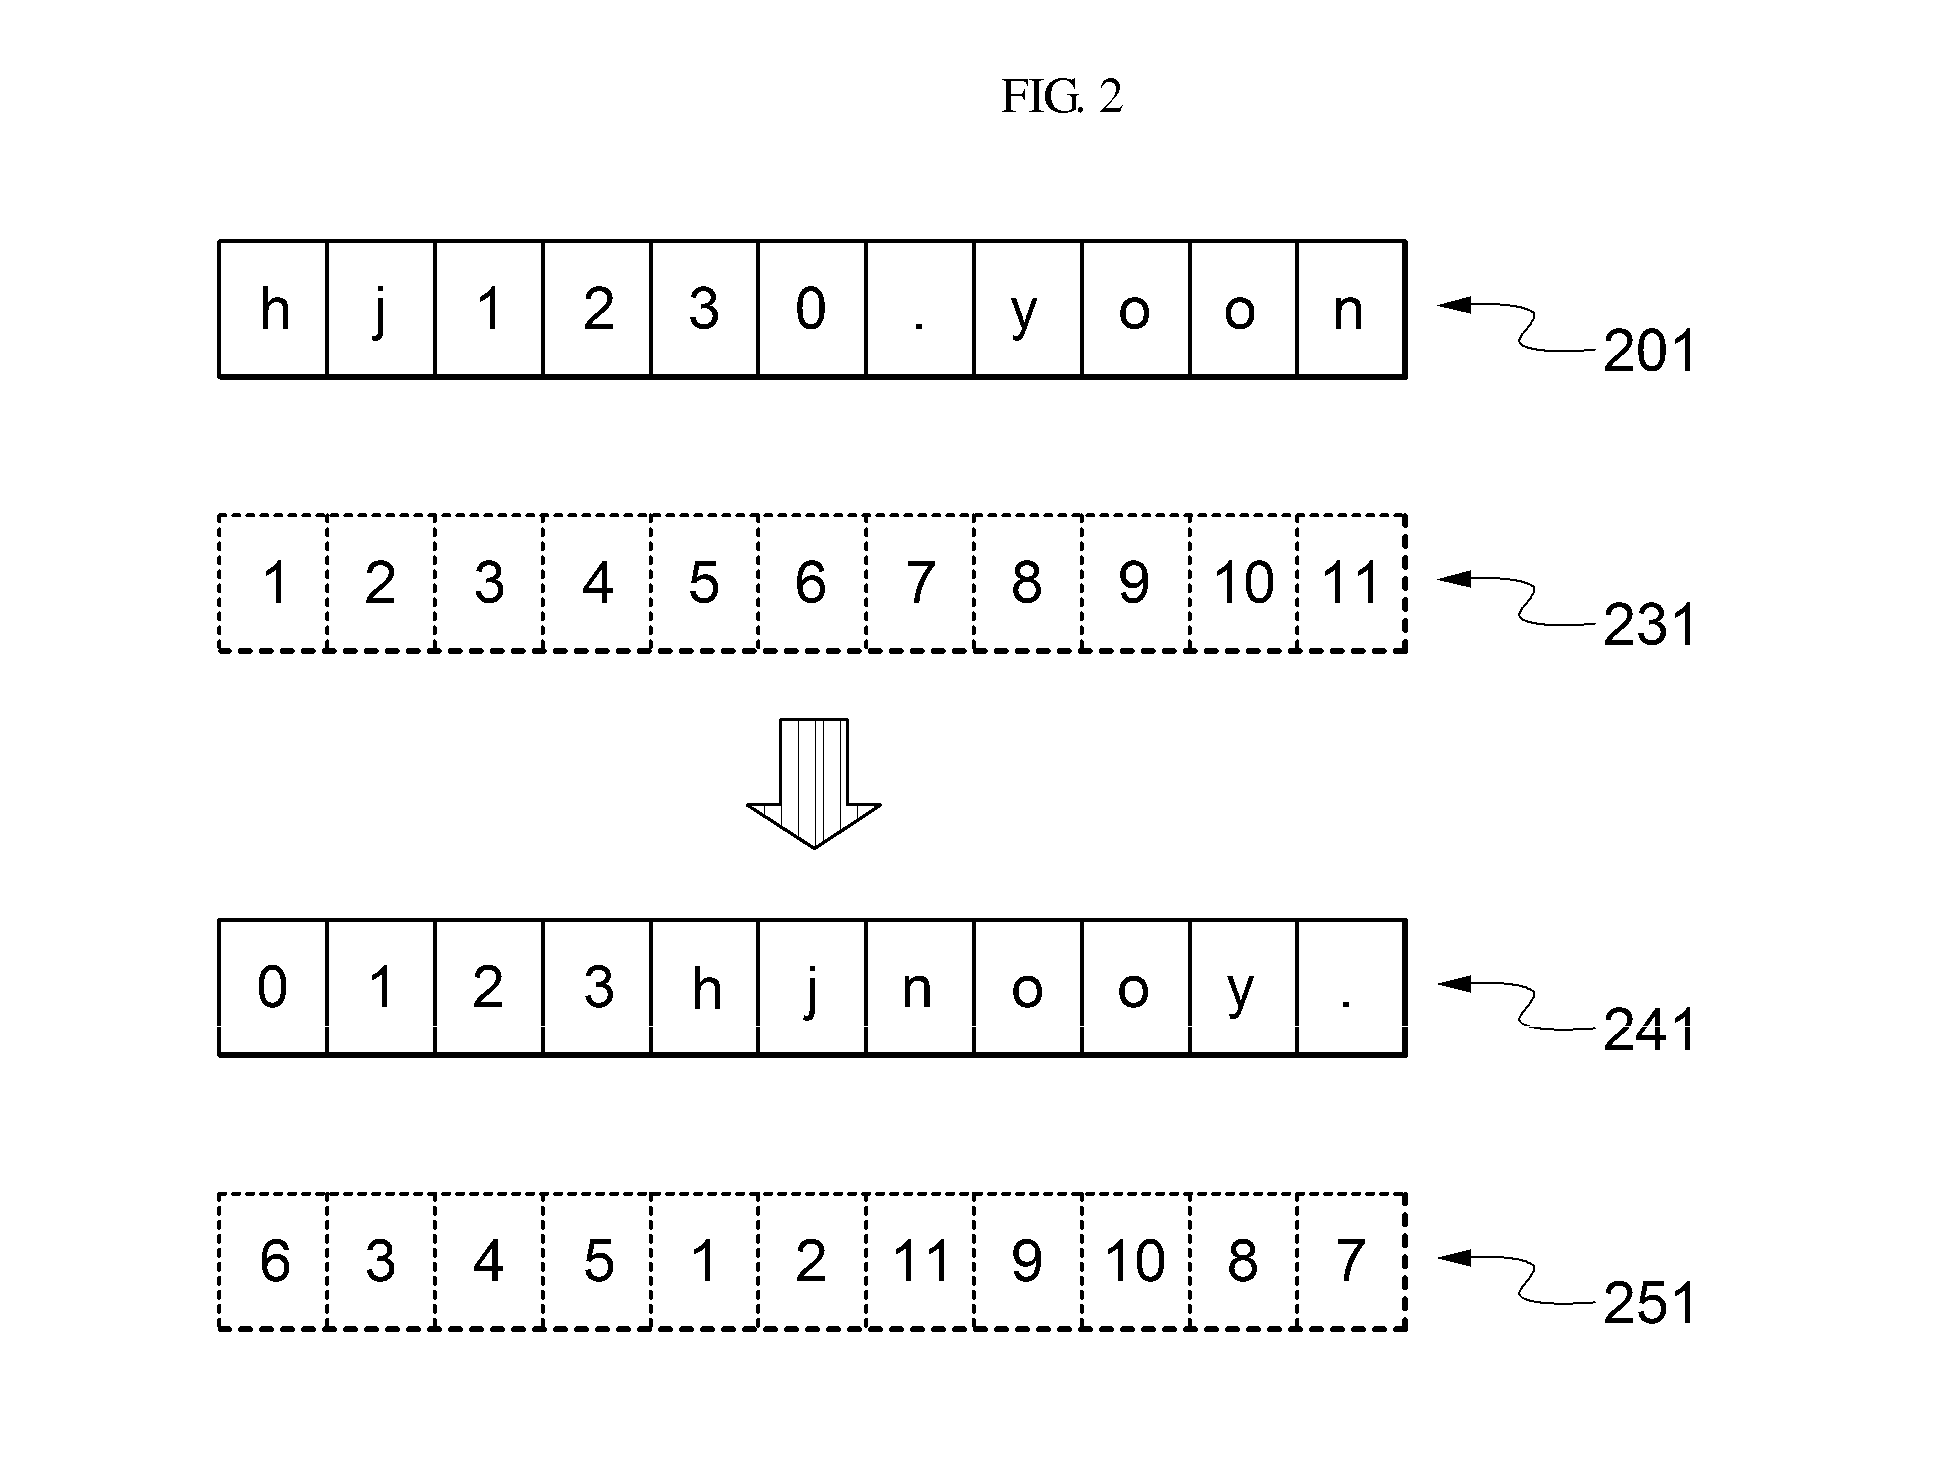 Apparatus and method for generating key